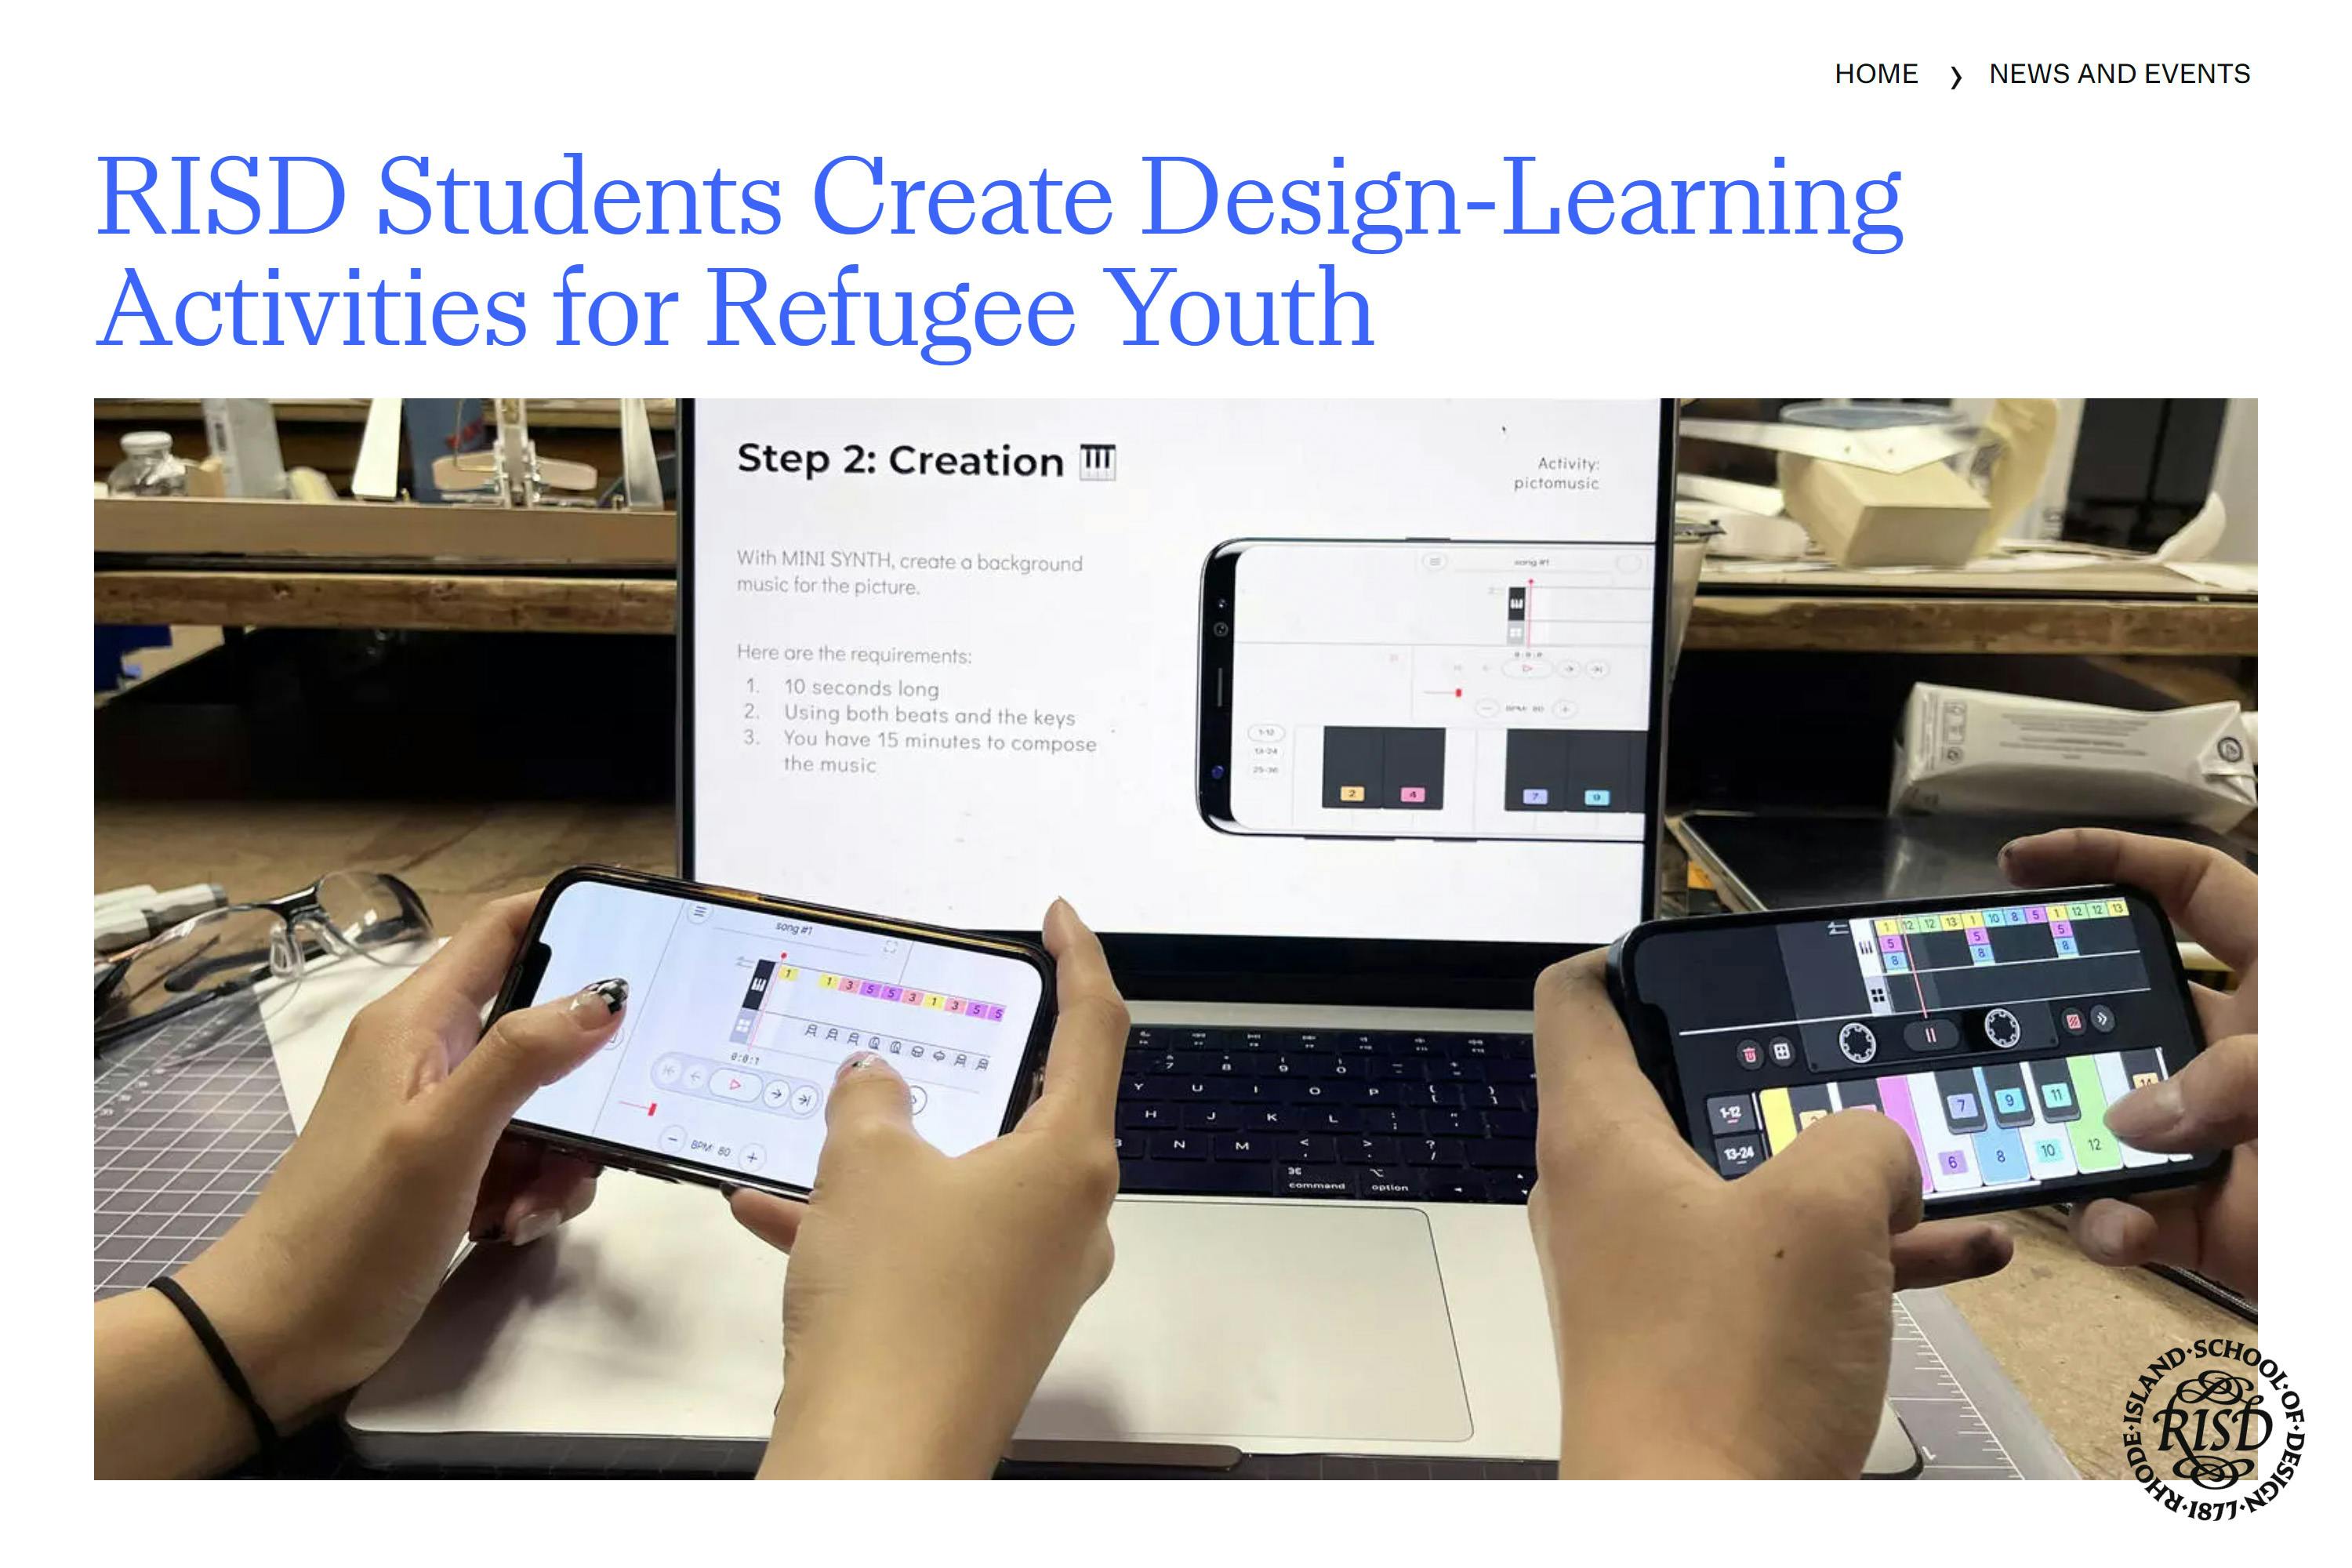 Screenshot of the RISD article titled “RISD Students Create Design-Learning Activities for Refugee Youth.” The page is filled with a large image showing two students interacting with Mini Synth.